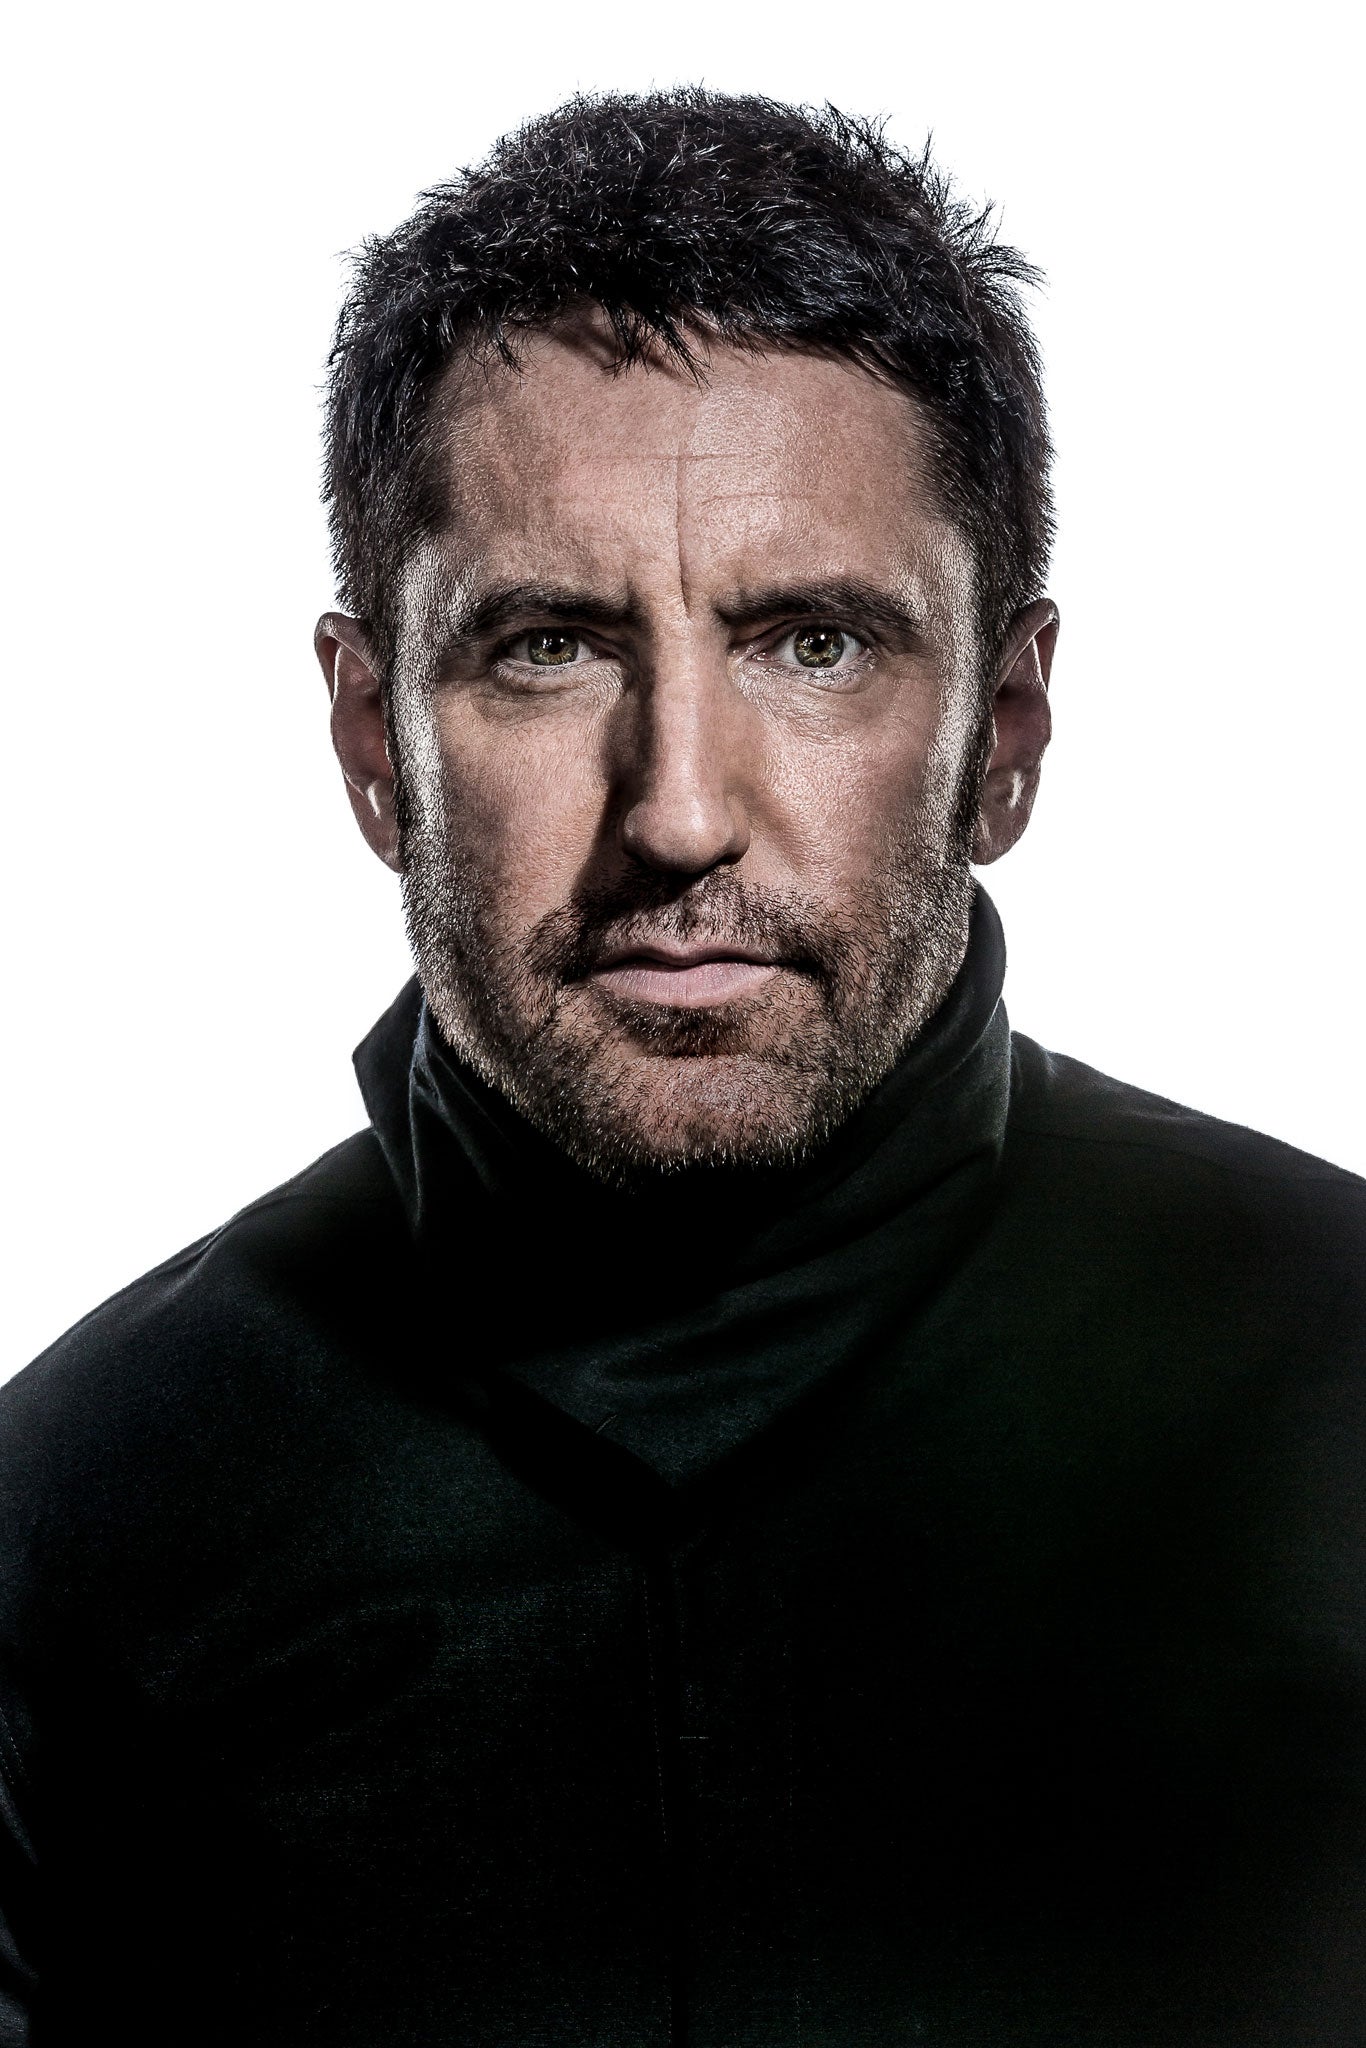 Trent Reznor: The Nine Inch Nails rocker talks addiction, scoring David  Fincher films and his David Bowie epiphany | The Independent | The  Independent